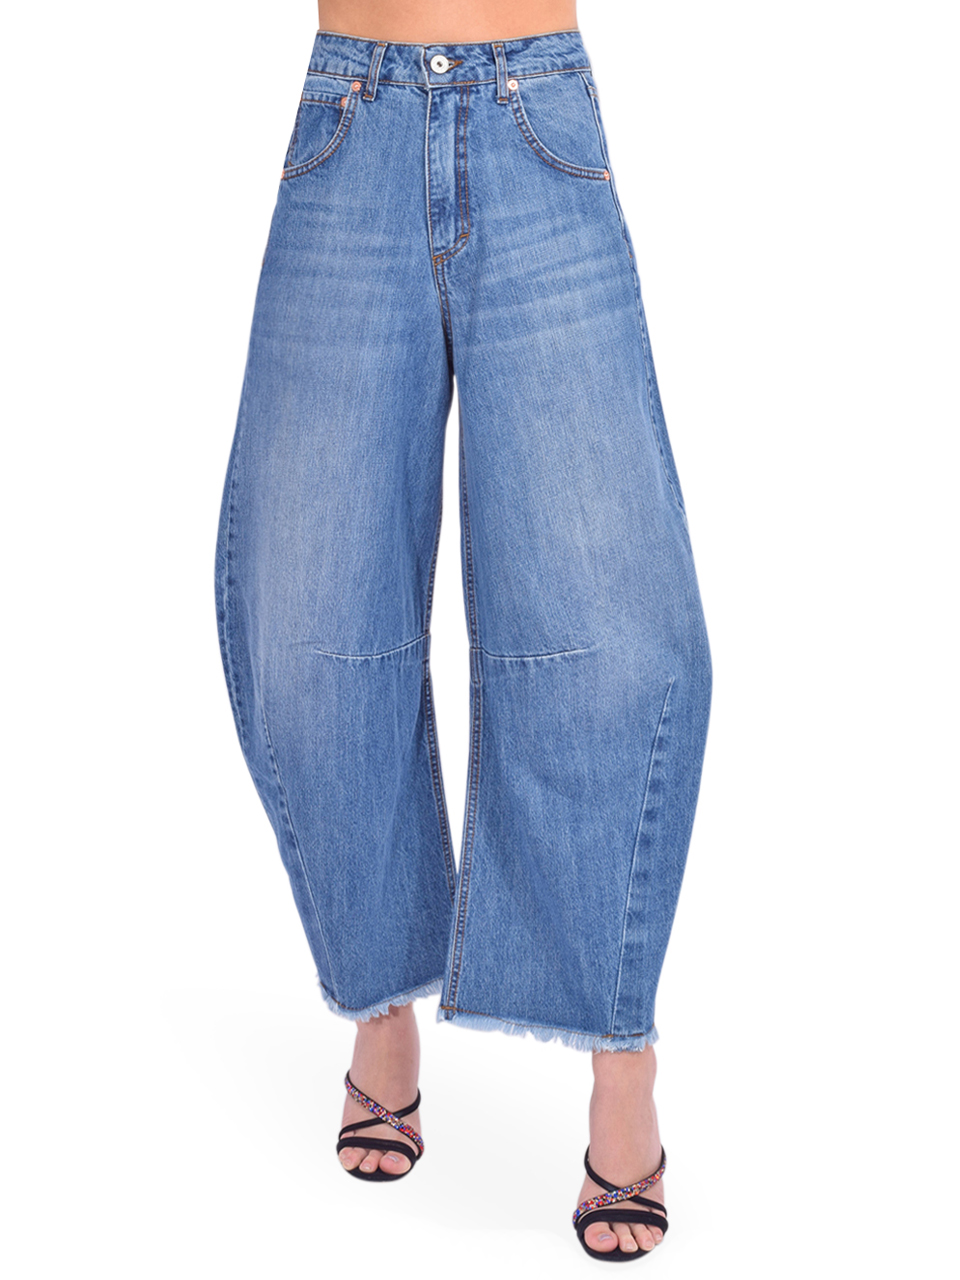 Ottod'Ame Horseshoes Barrel Jean in Blue Front View 